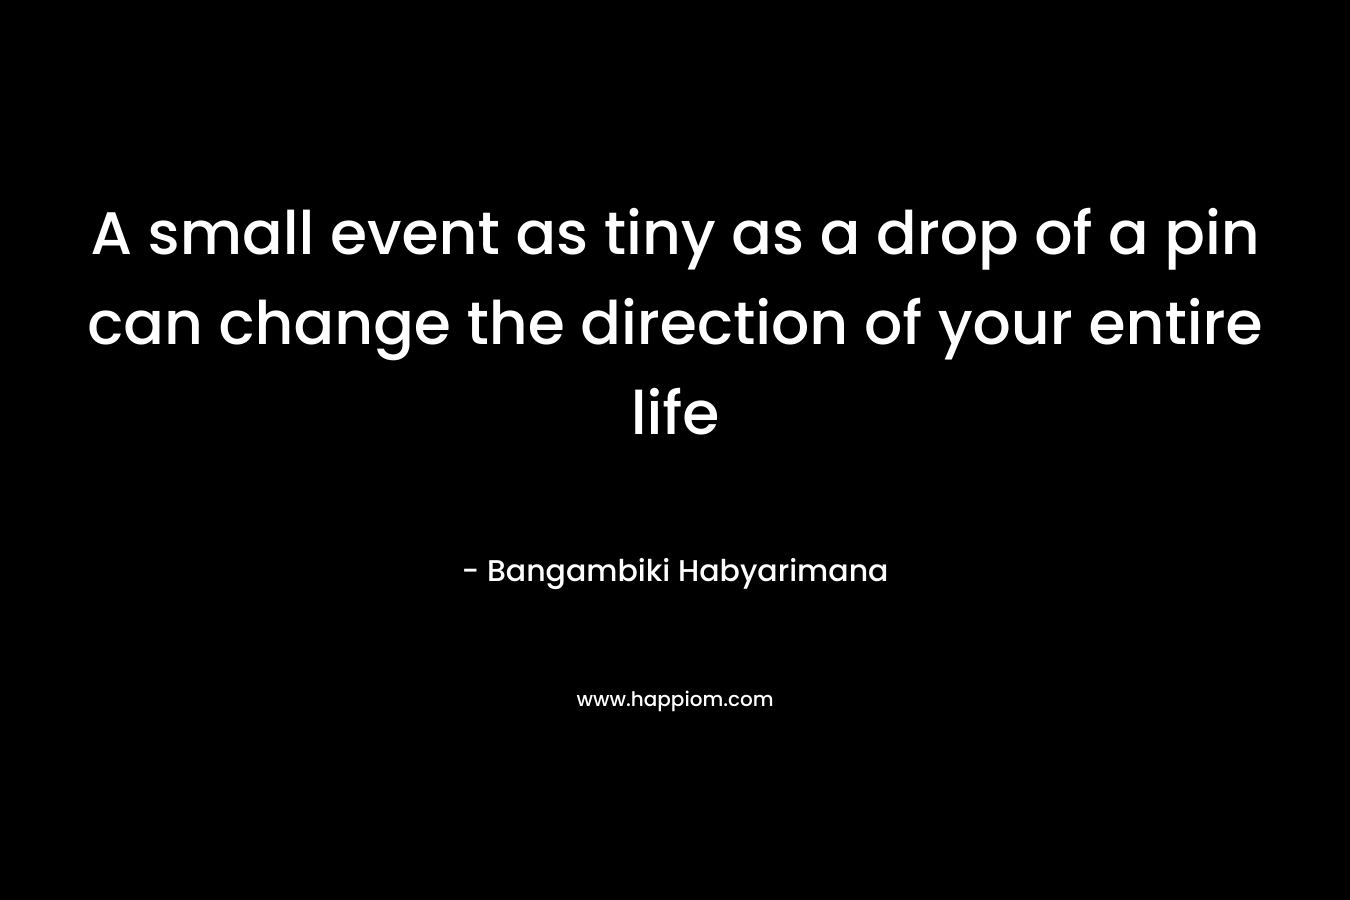 A small event as tiny as a drop of a pin can change the direction of your entire life – Bangambiki Habyarimana